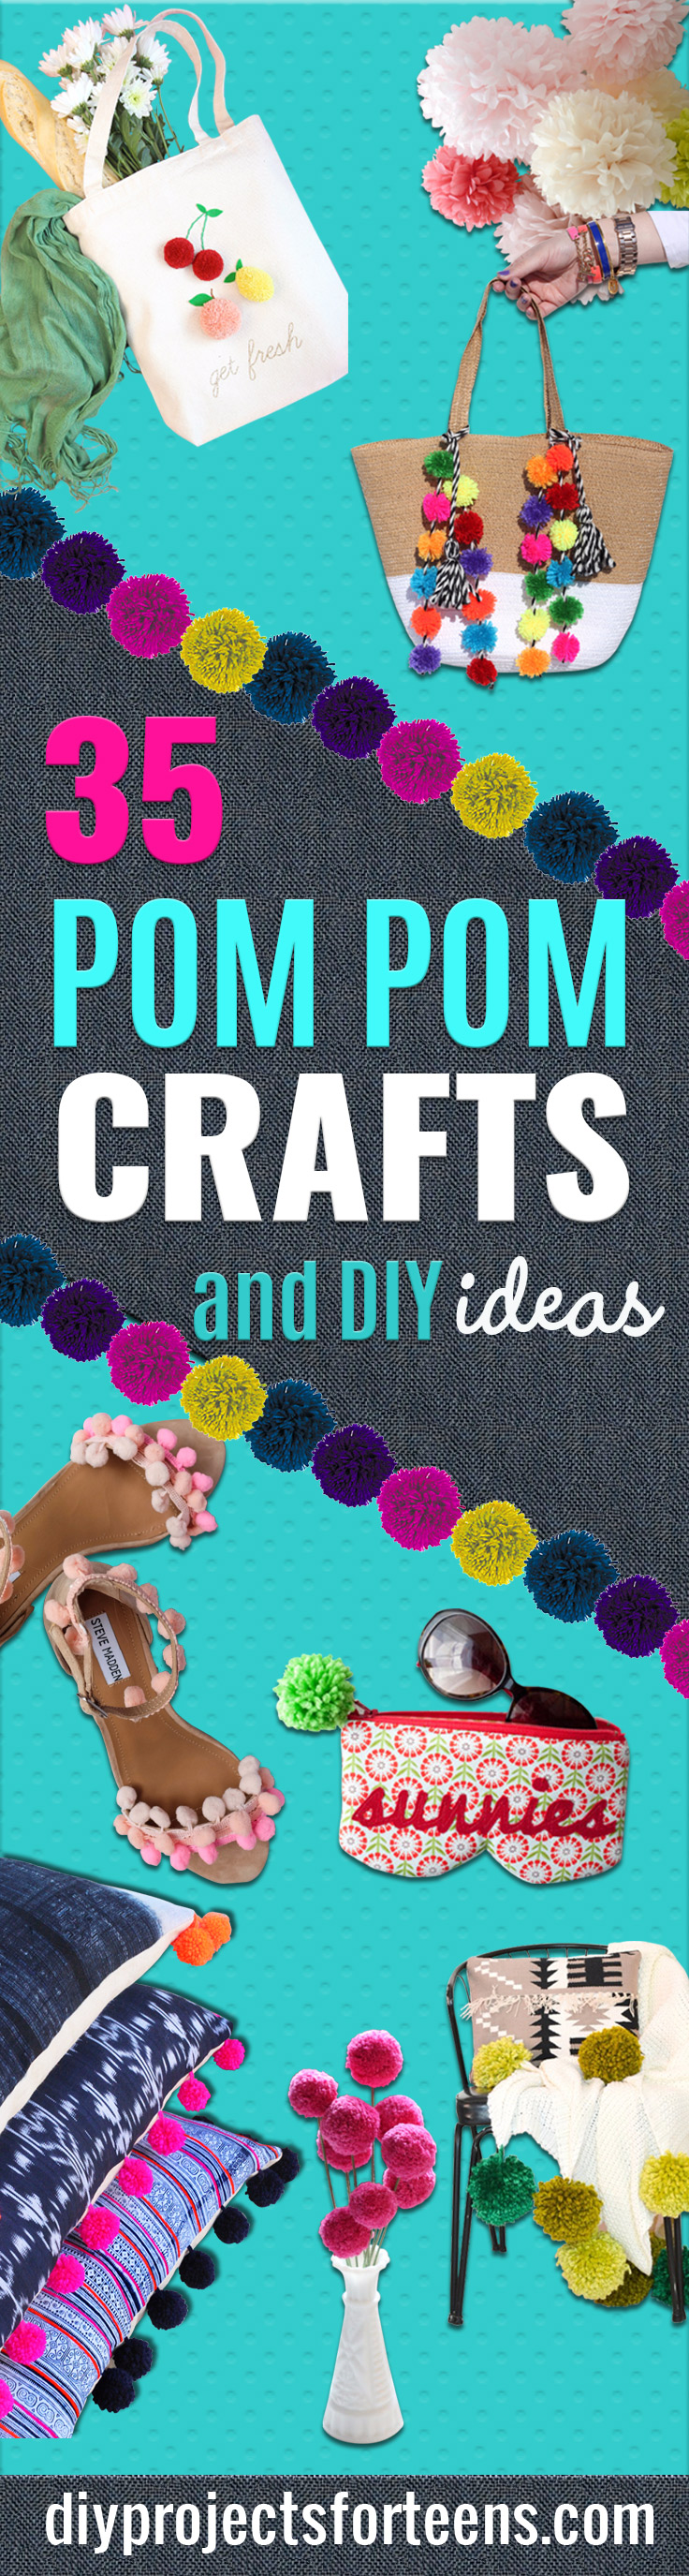 DIY Crafts with Pom Poms - Fun Yarn Pom Pom Crafts Ideas. Garlands, Rug and Hat Tutorials, Easy Pom Pom Projects for Your Room Decor and Gifts http://diyprojectsforteens.com/diy-crafts-pom-poms